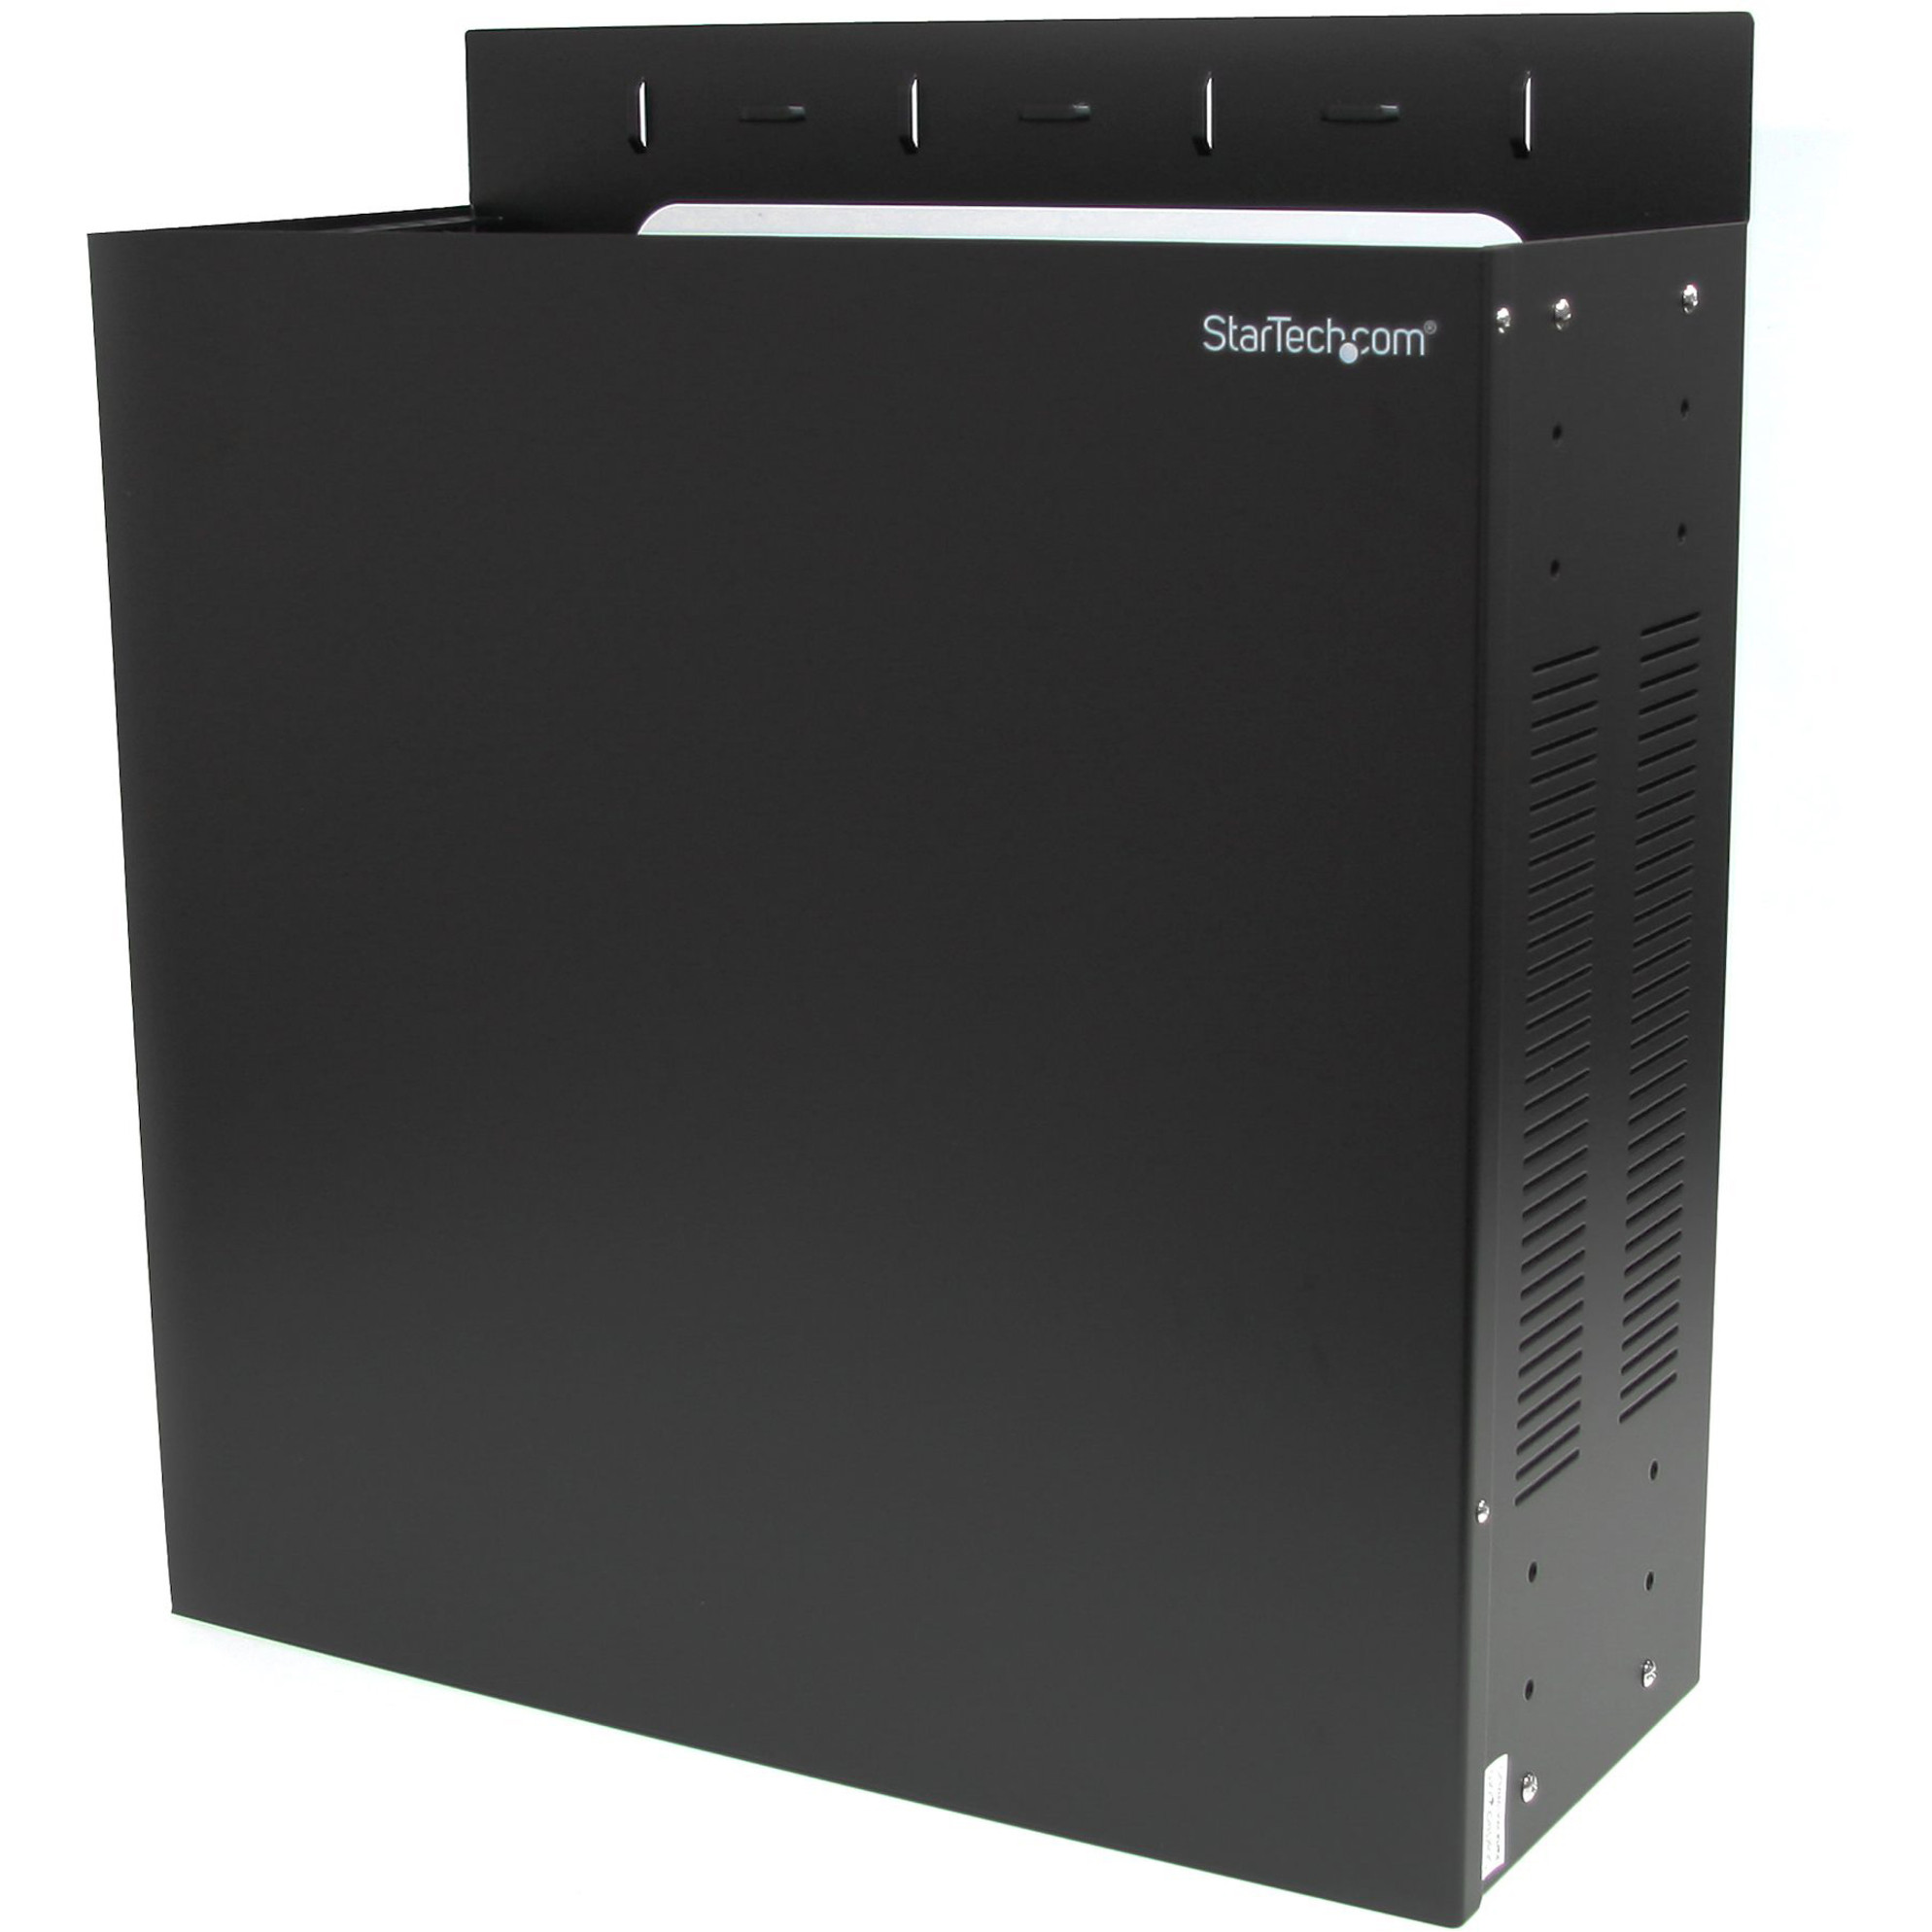 Startech .com Wallmount Server RackLow-Profile Cabinet for Servers with Vertical Mounting4UWallmount your server or networking equipm… RK419WALVO